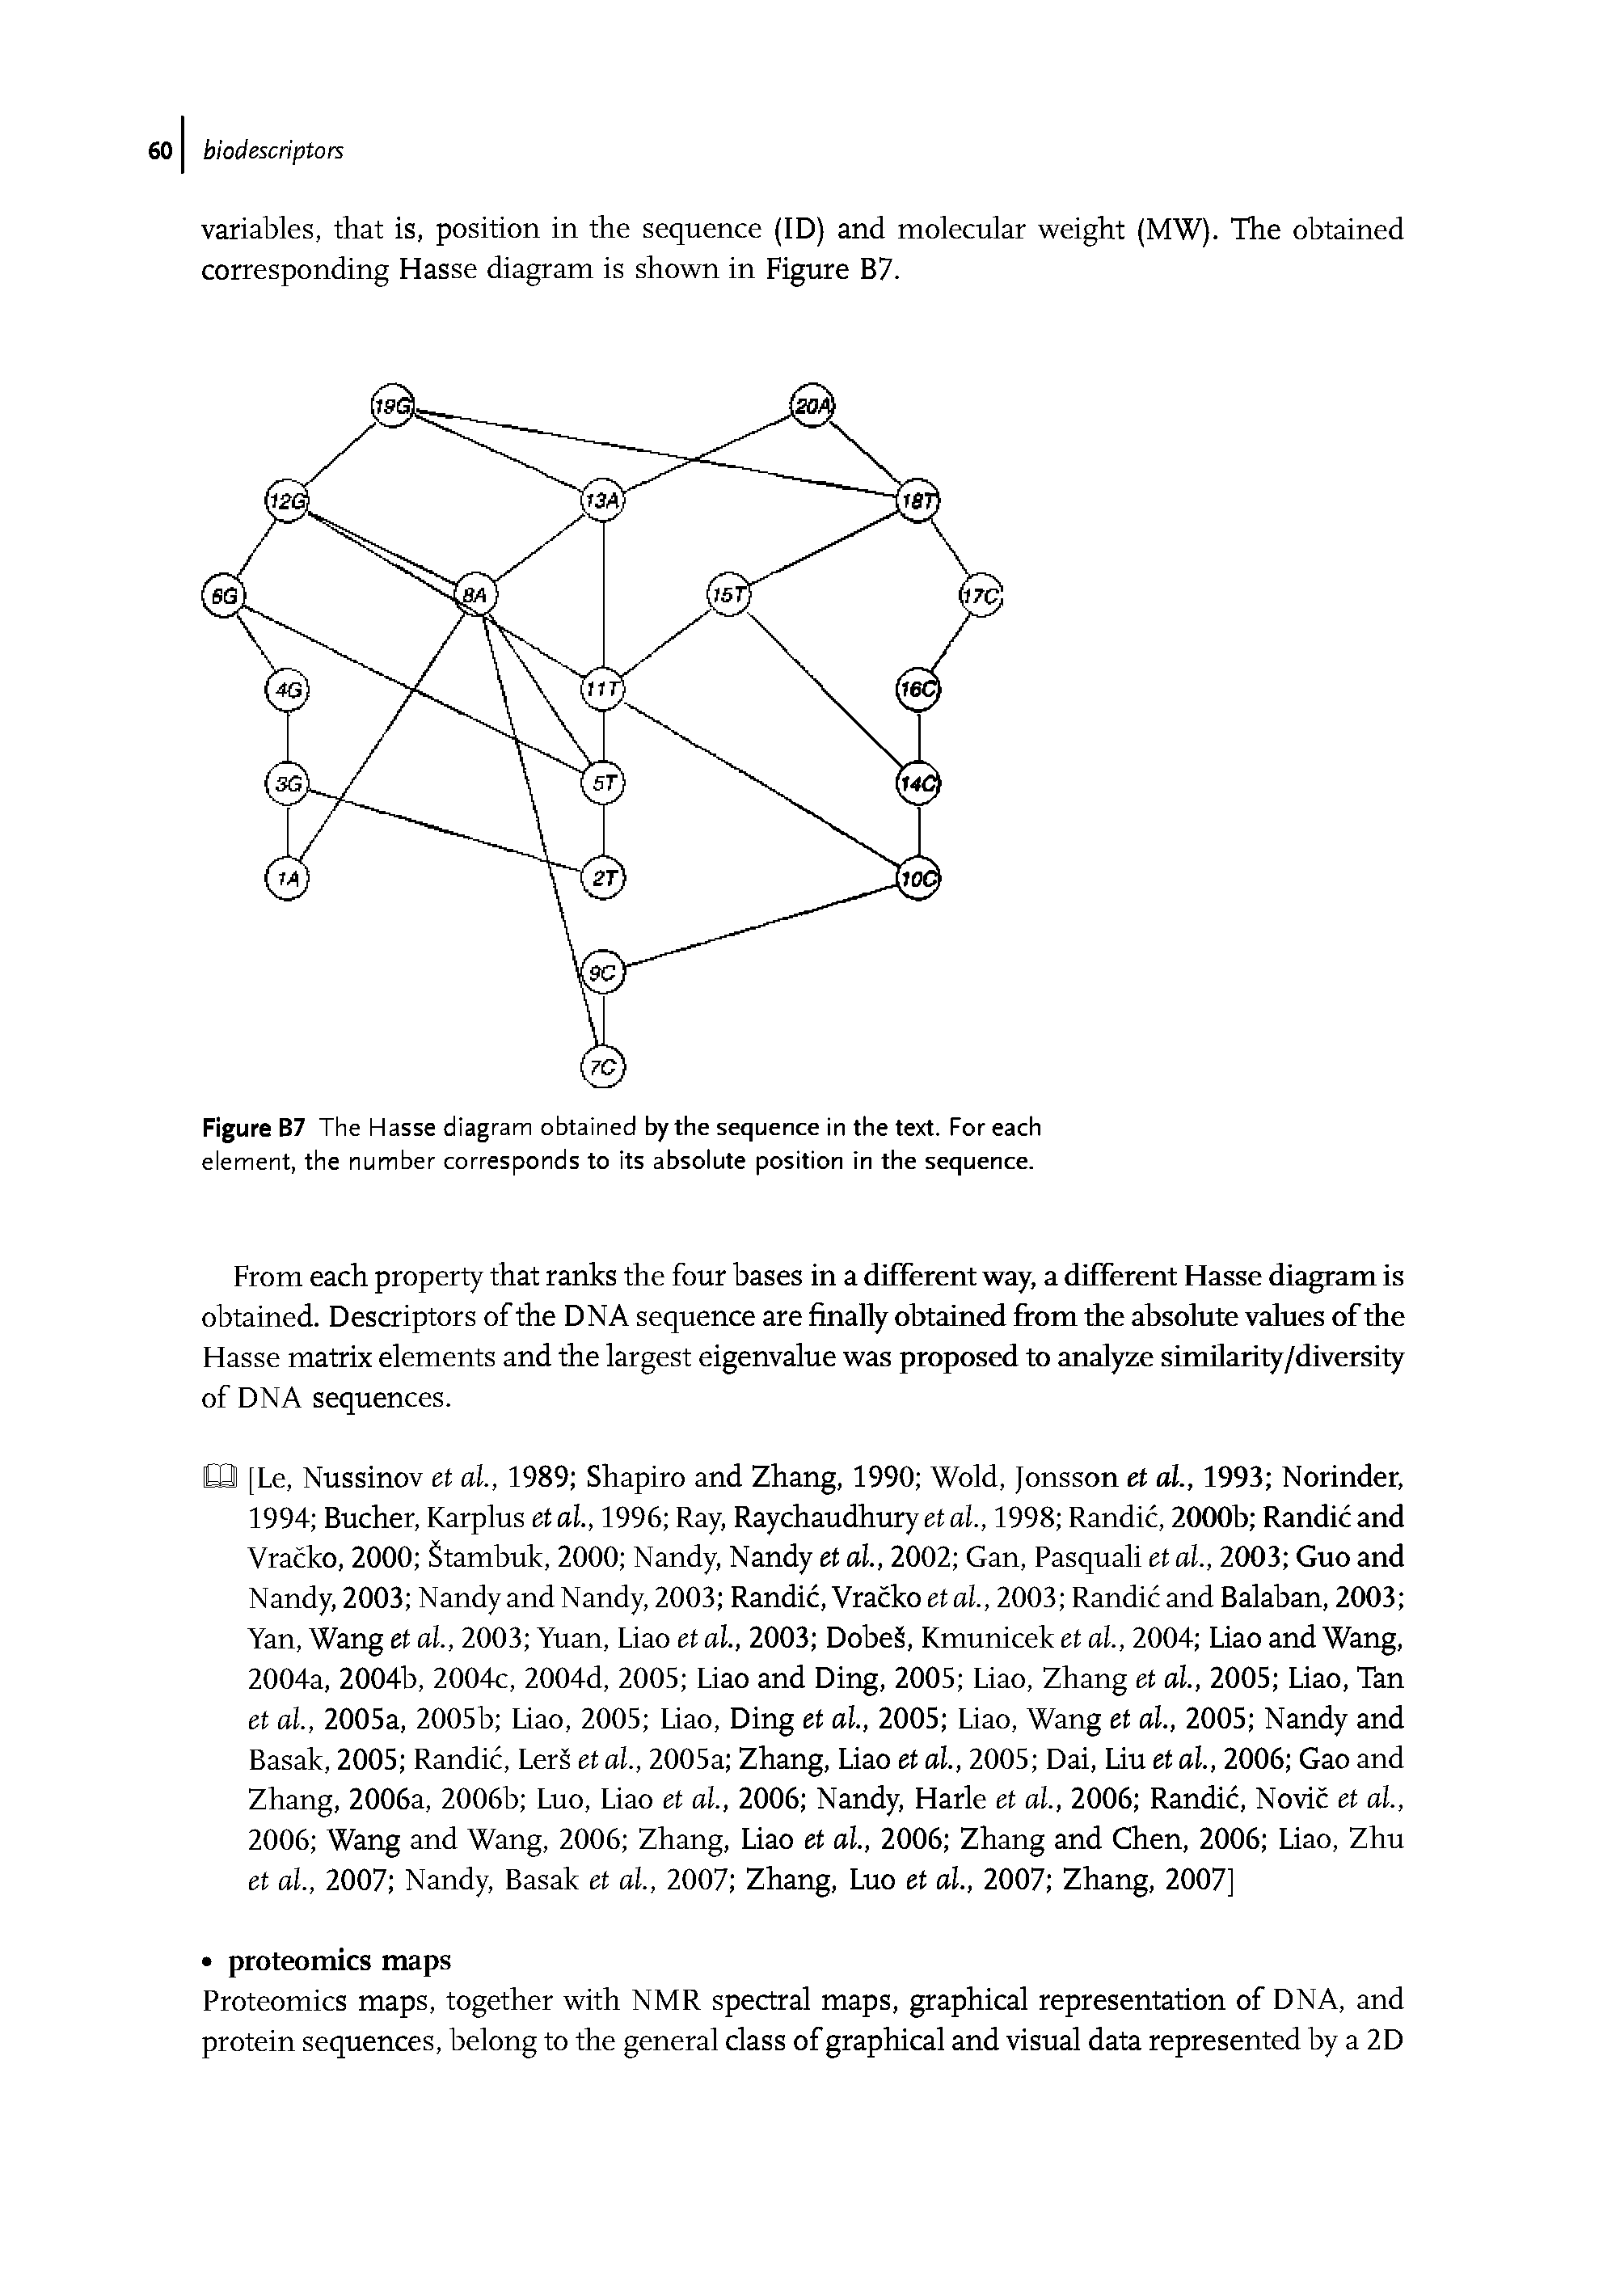 Figure B7 The Hasse diagram obtained by the sequence in the text. For each element, the number corresponds to its absolute position in the sequence.